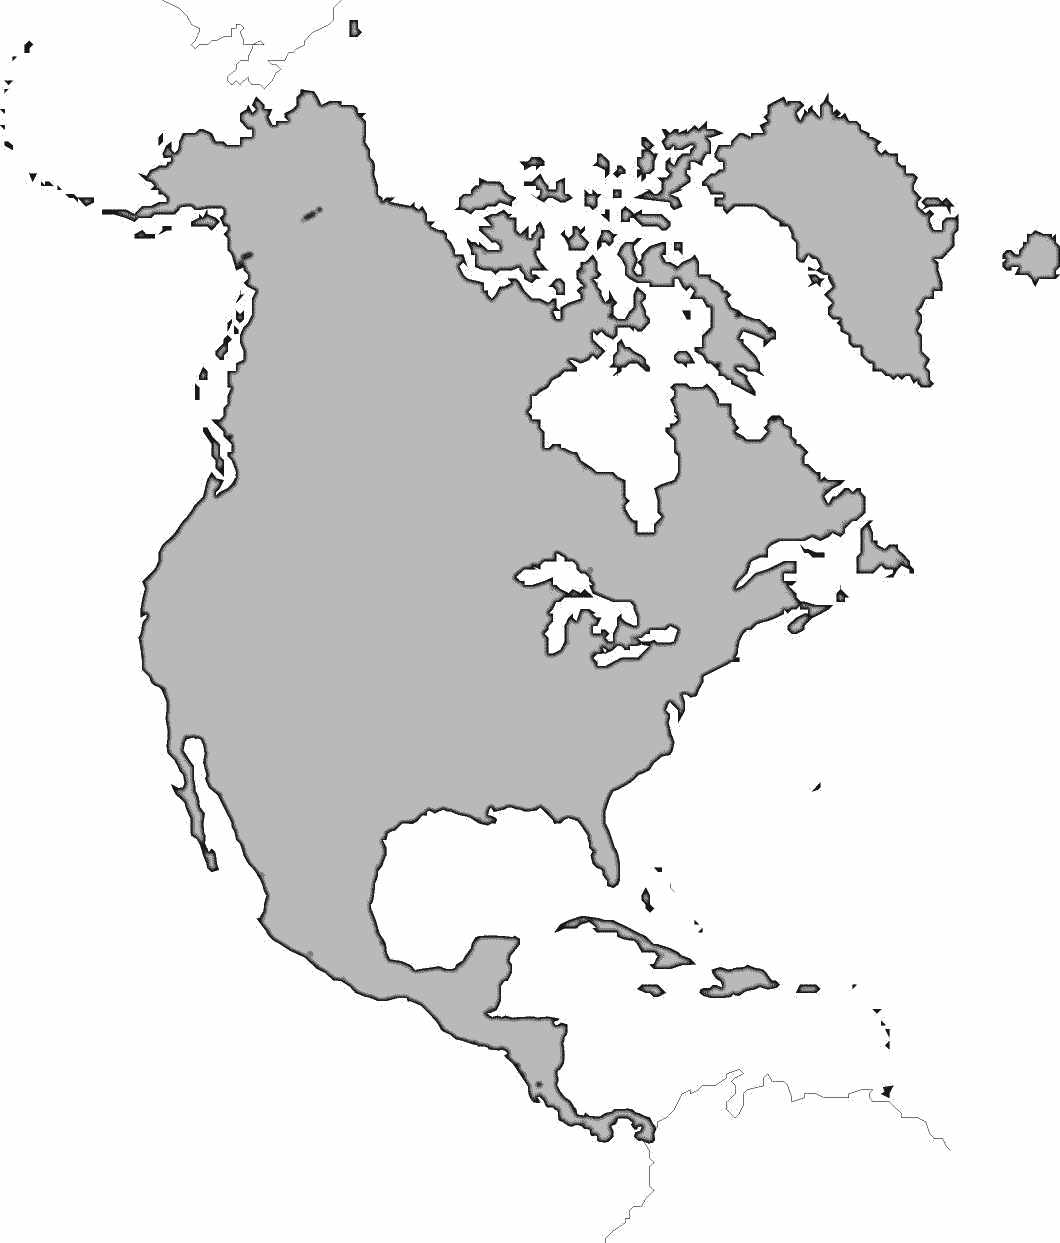 Blank Map Of North America Without Regional Borders